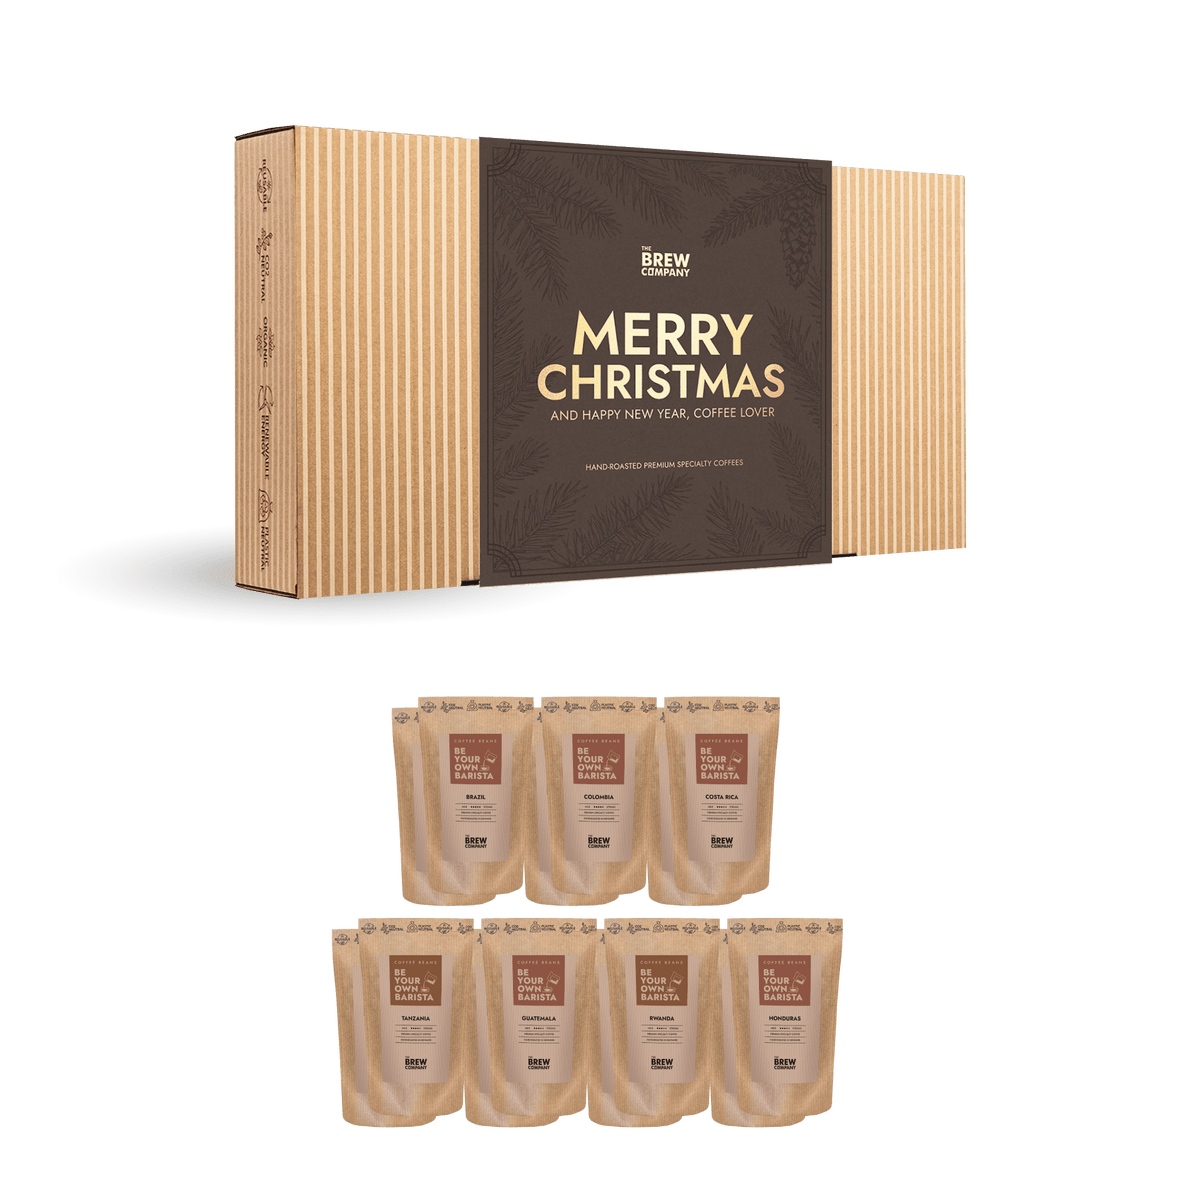 PREMIUM SPECIALTY COFFEE BEAN CHRISTMAS GIFT BOX Gift Boxes The Brew Company